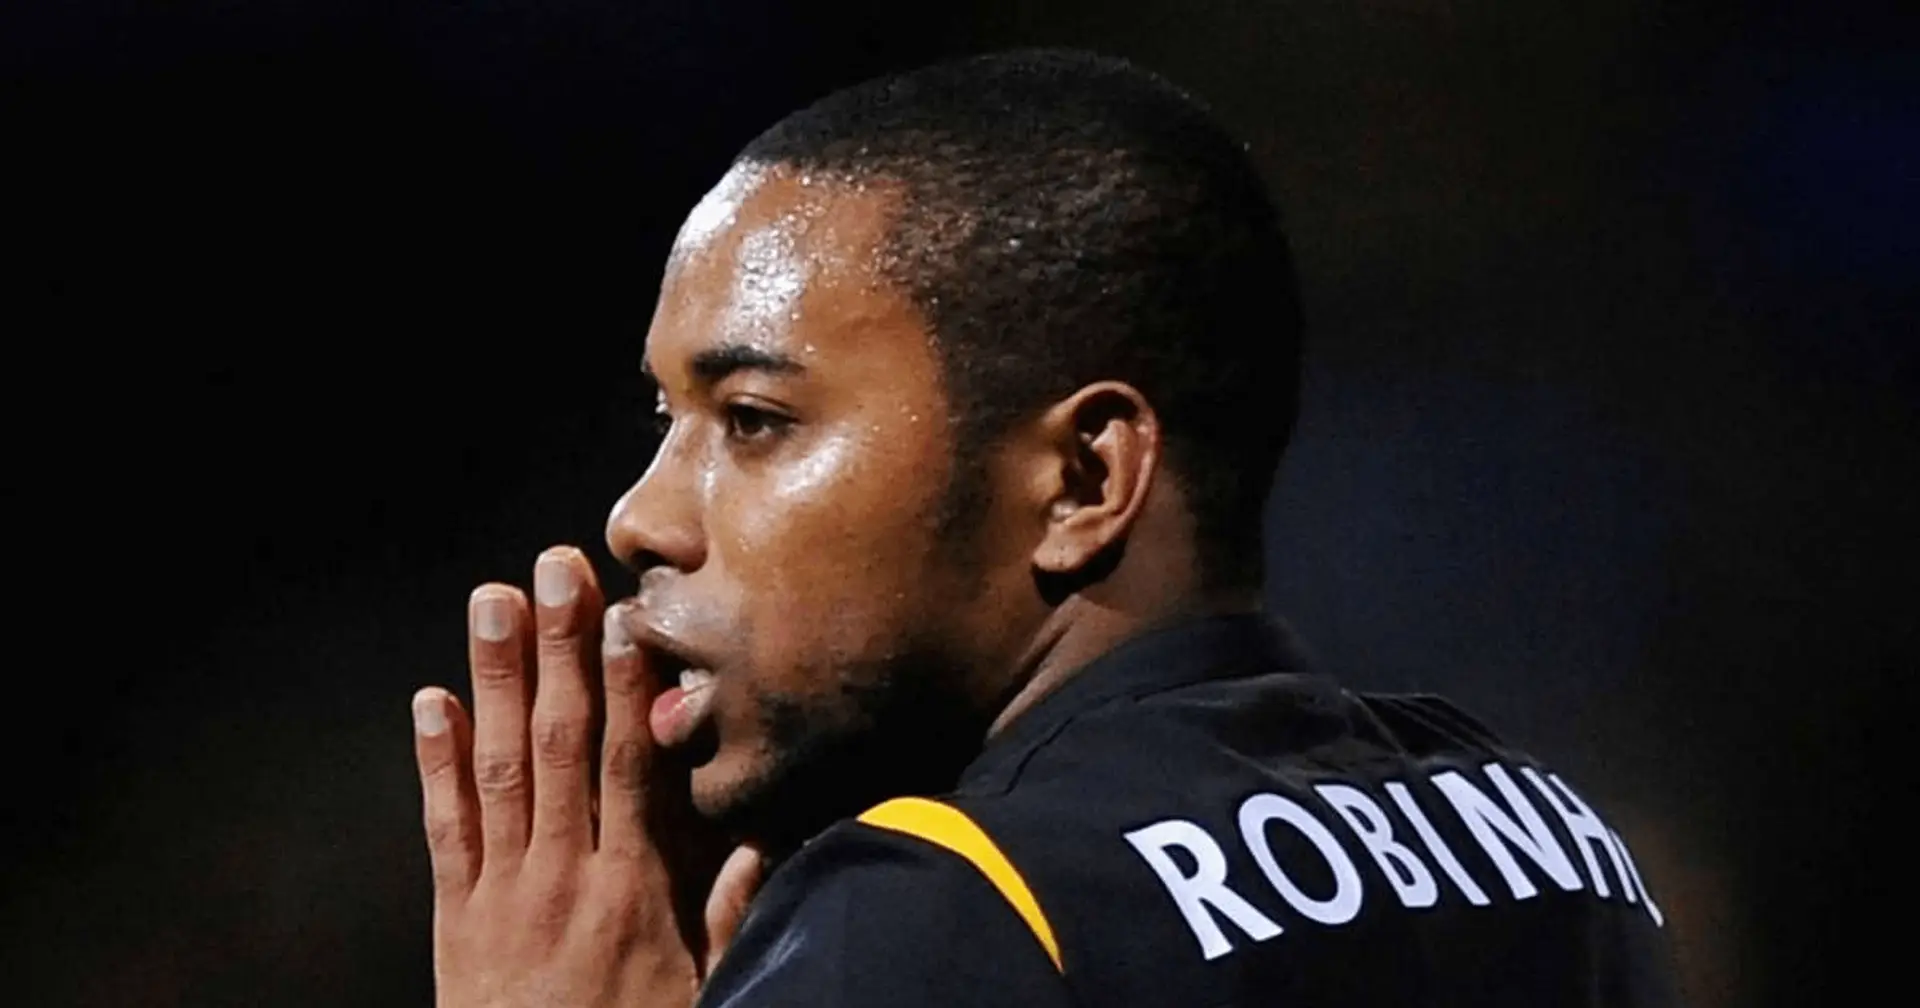 Robinho's appeal rejected as ex-Madrid star sentenced to 9-year jail for ‘brutally humiliating gang-rape victim’